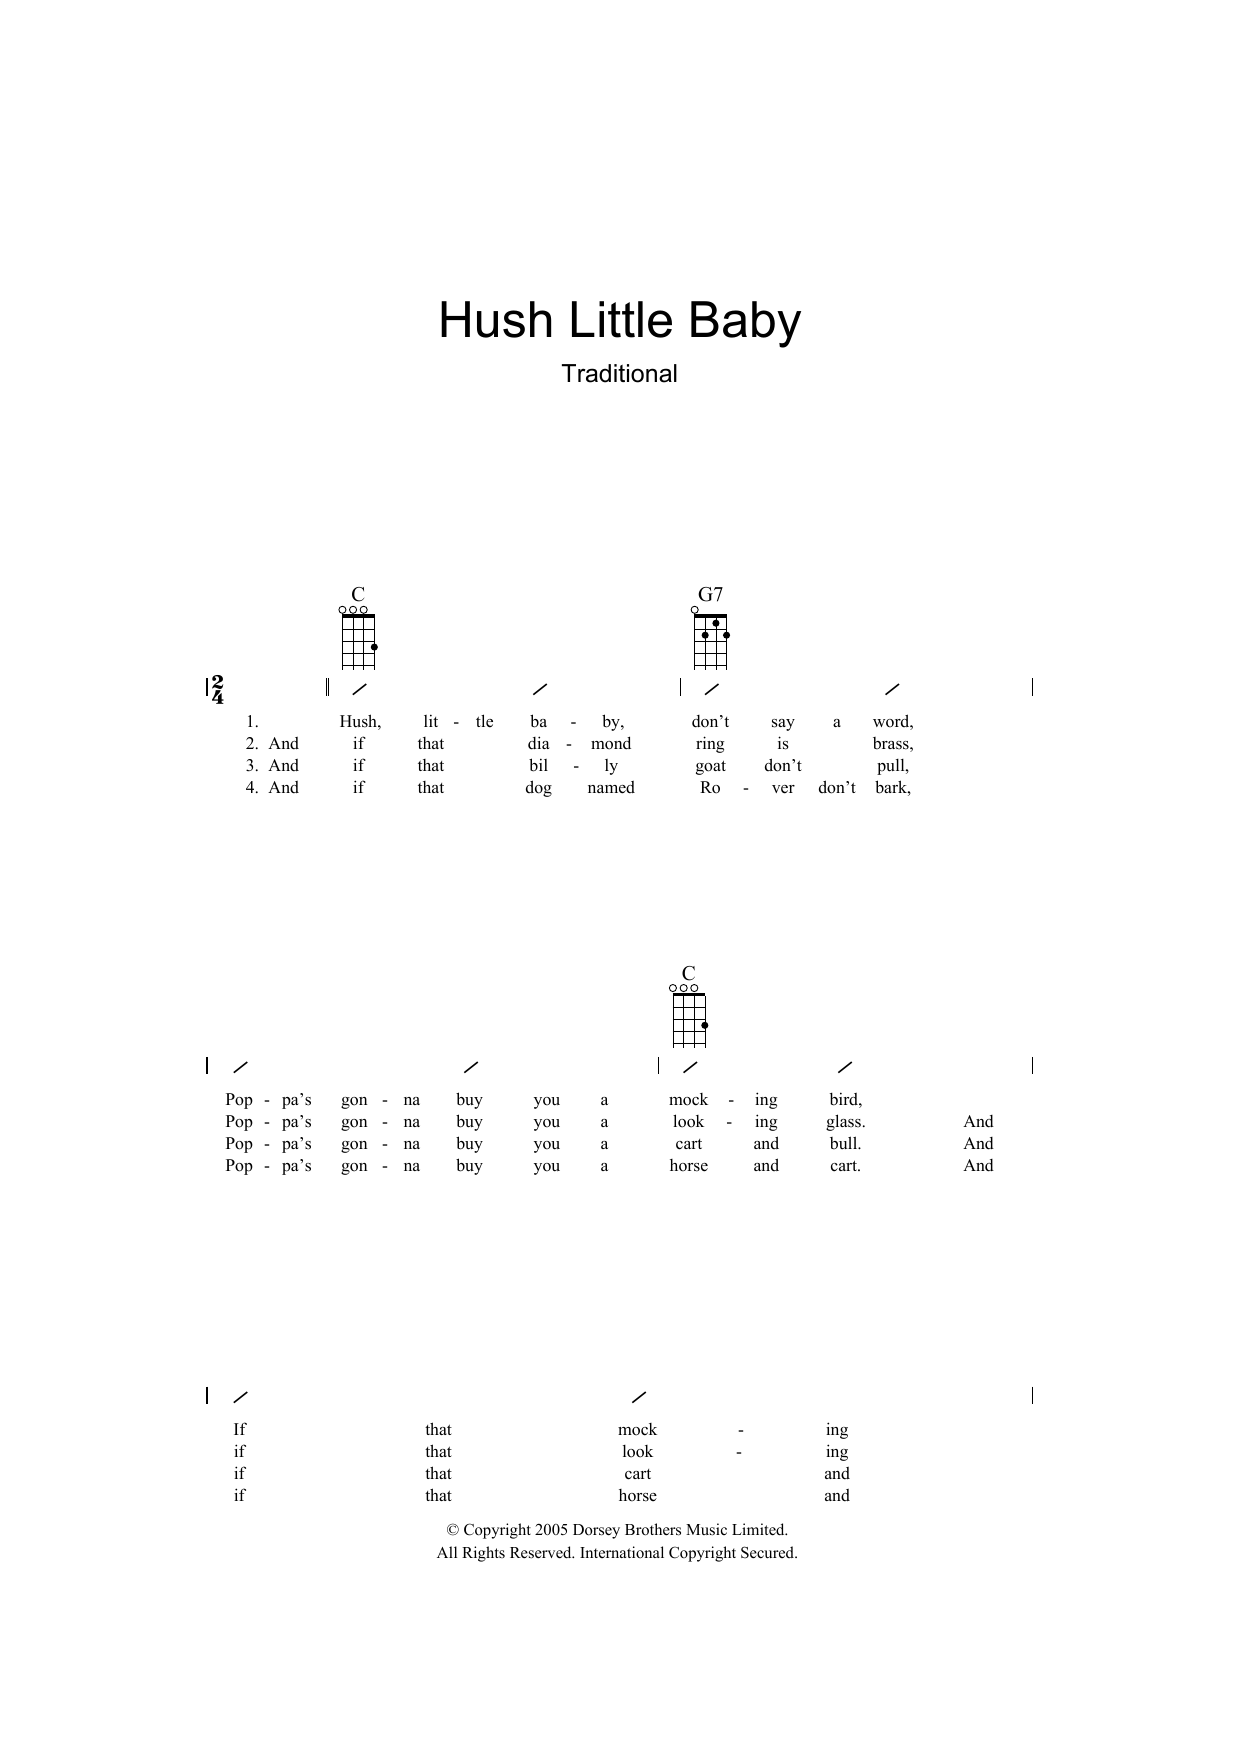 Download Traditional Hush Little Baby Sheet Music